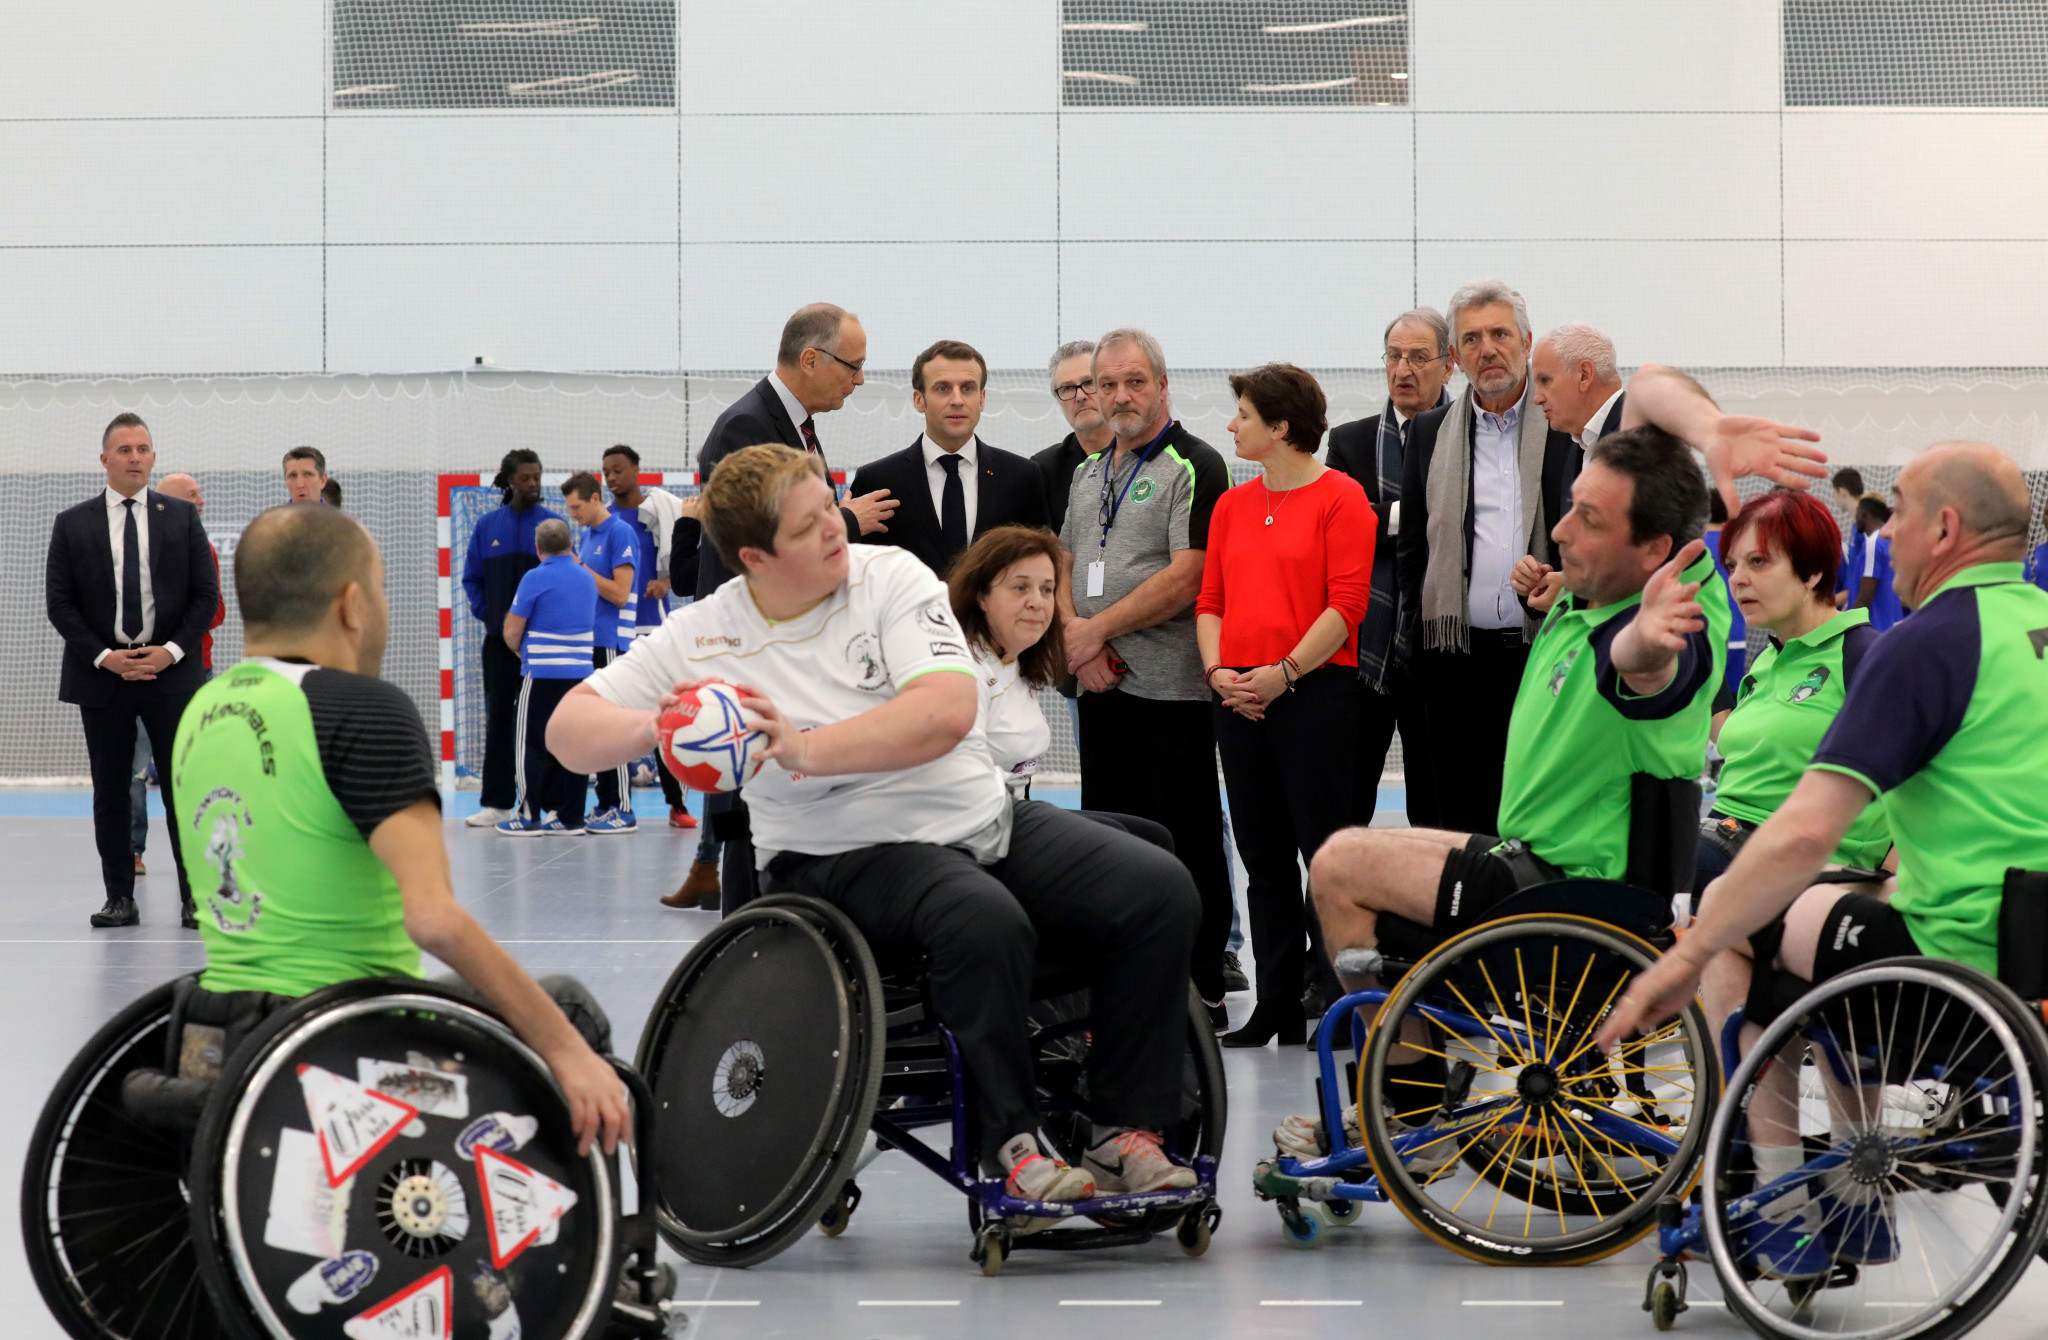 A wheelchair handball team in action during the inauguration of a new handball stadium in Creteil in France last year ©Getty Images